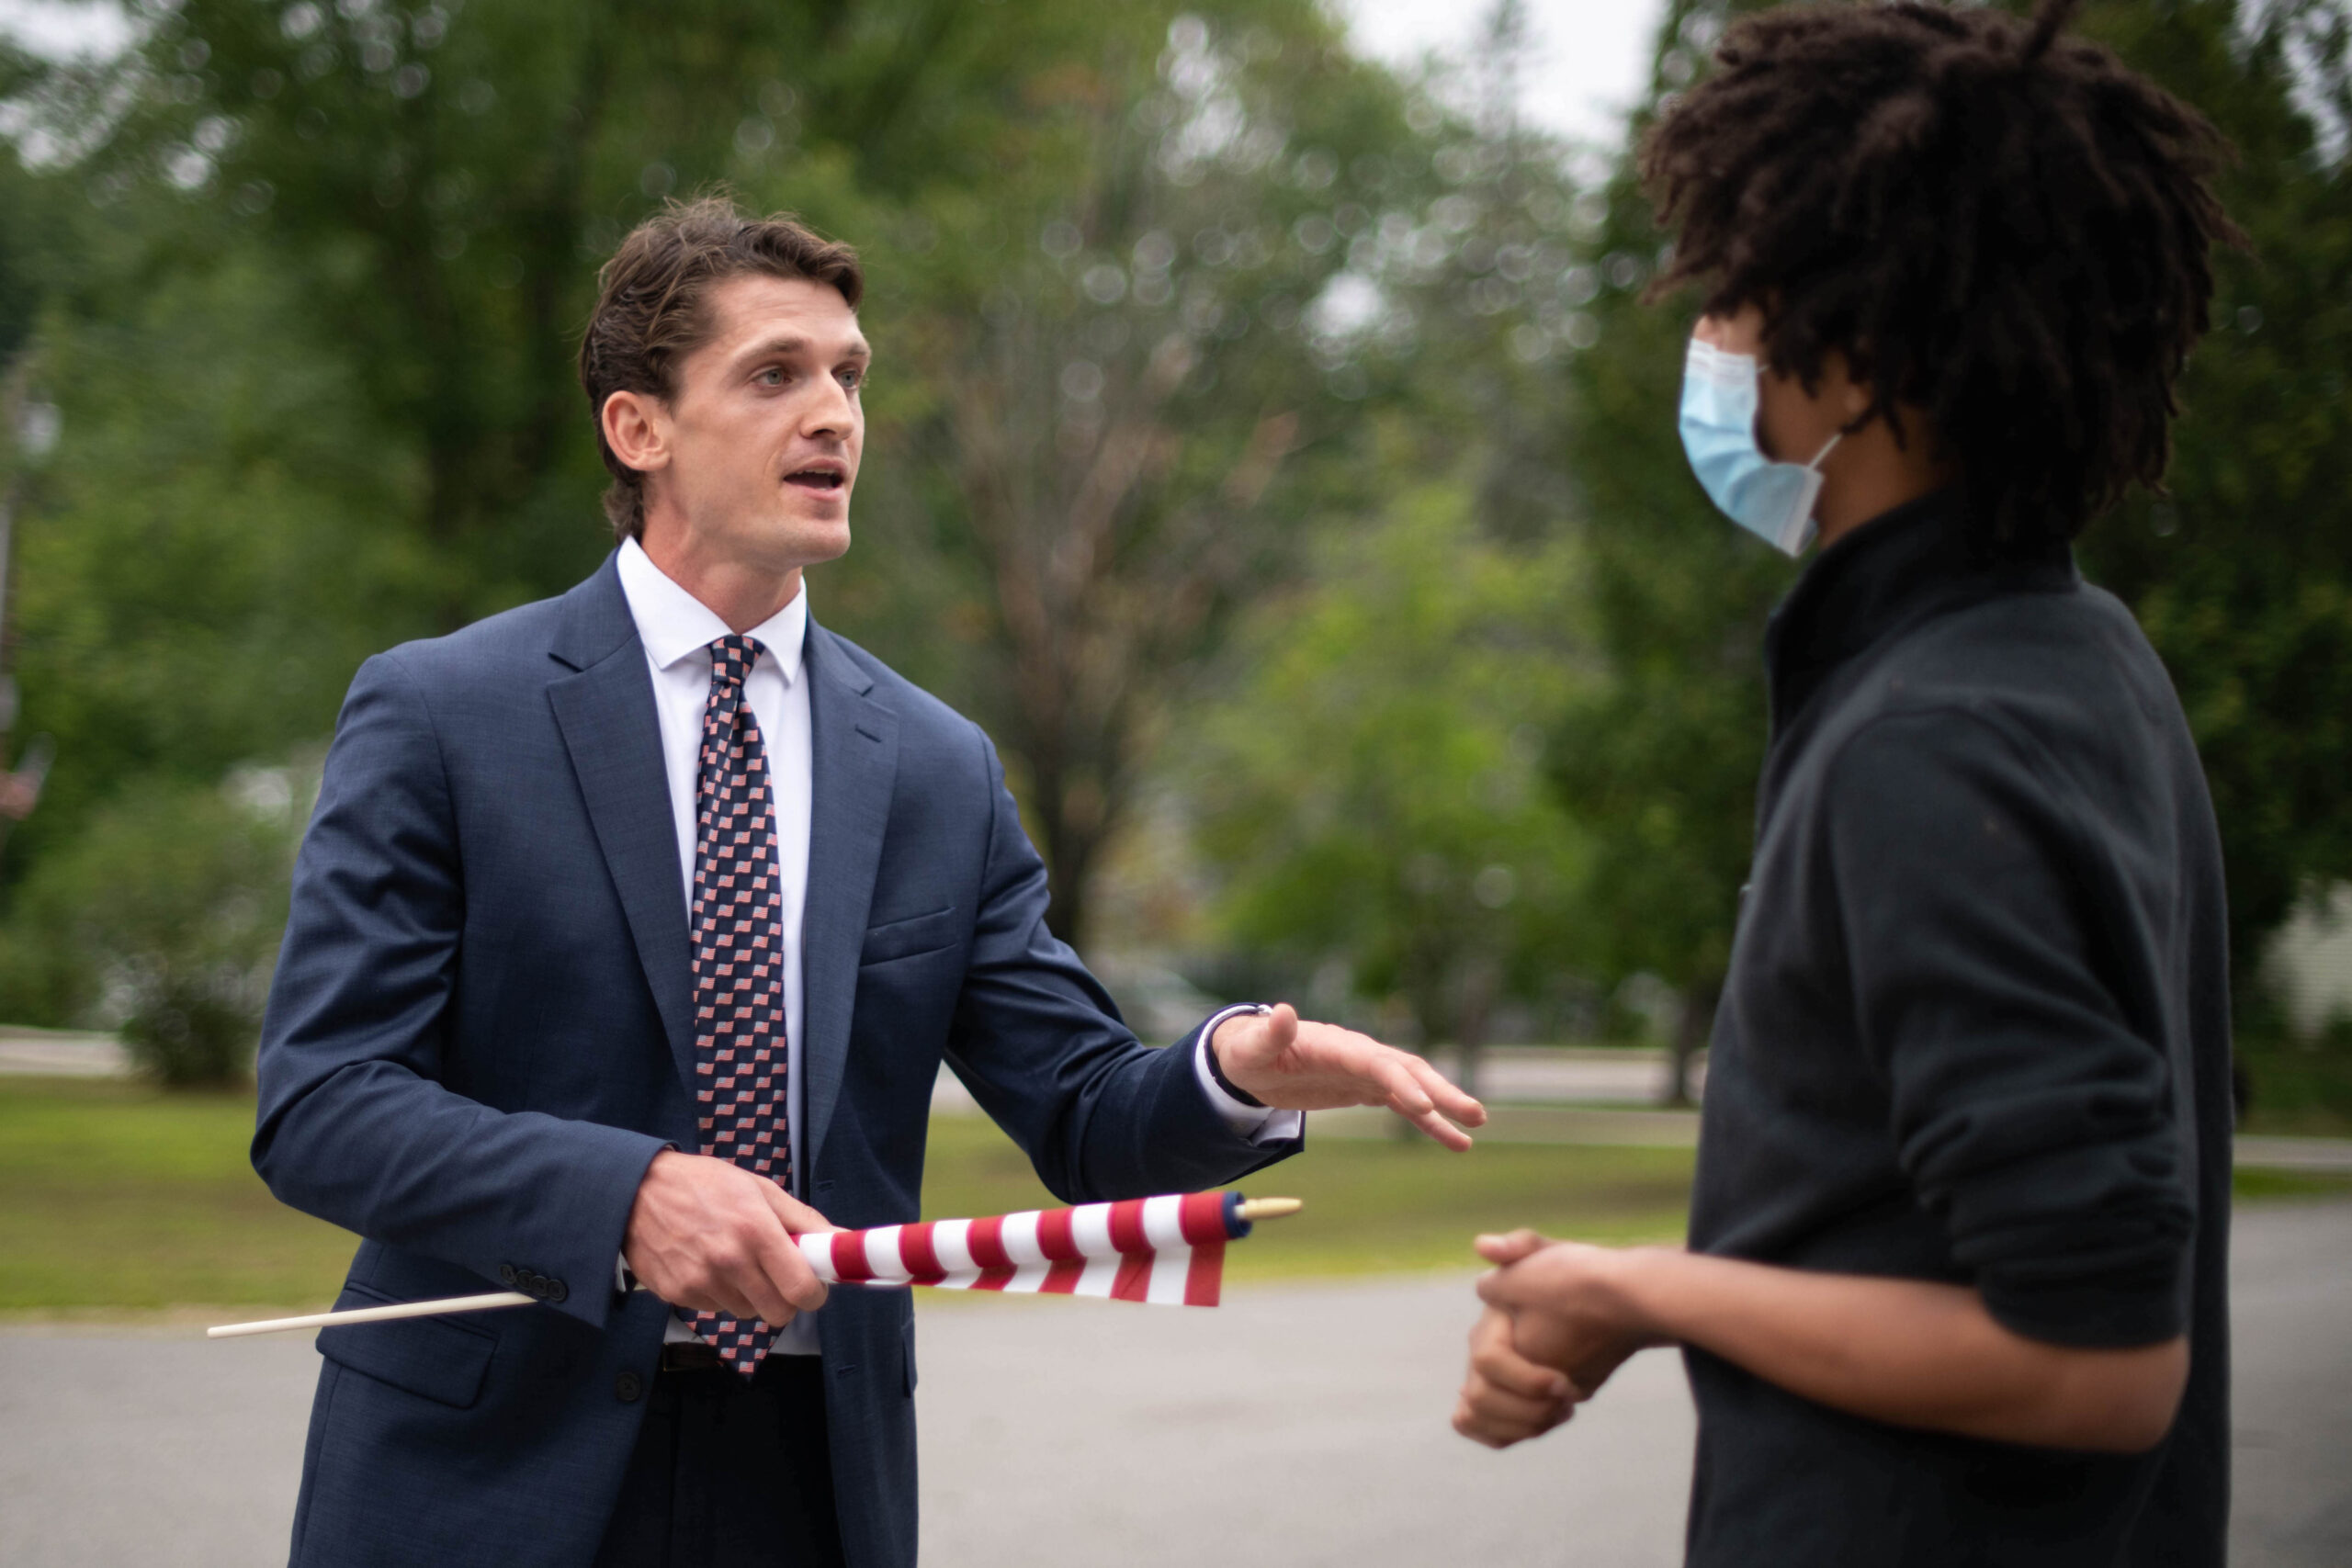 Greg Carter, left, tells Jonah Wheeler, right, both of Peterborough, New Hampshire, that systemic racism doesn't exist during a "Pro-Police, Pro-America" rally in Peterborough in August, 2020. Photo by Ben Conant/Monadnock Ledger-Transcript